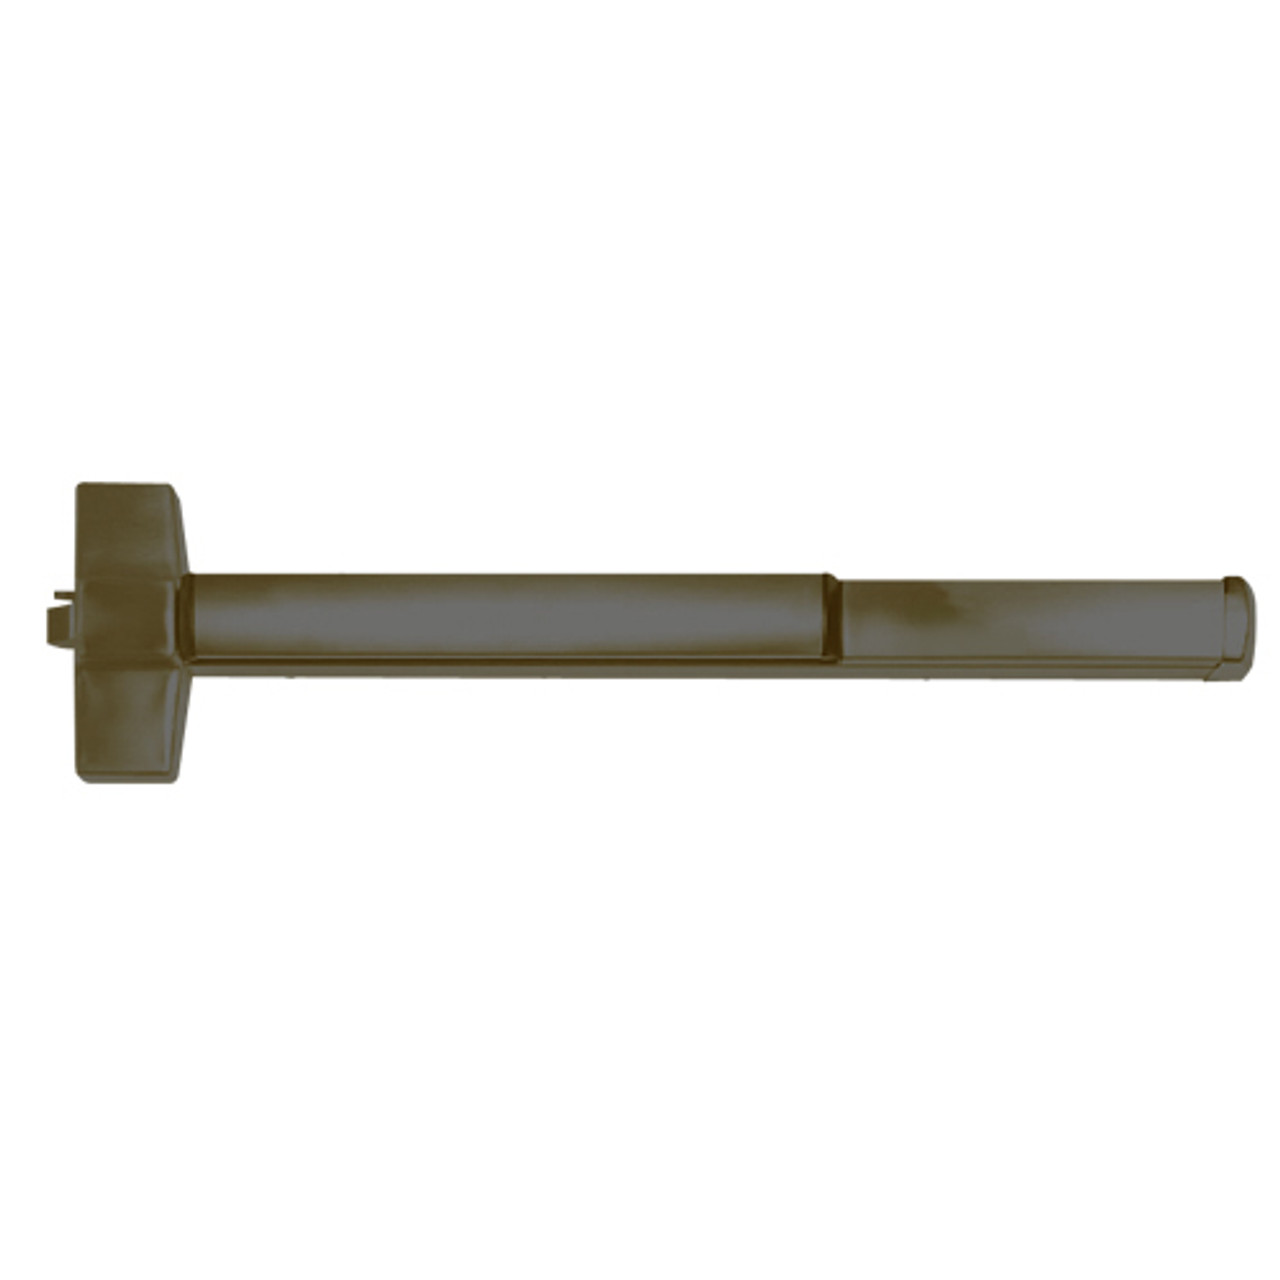 ED5200A-613-W048-M61 Corbin ED5200 Series Fire Rated Rim Exit Device with Exit Alarm Device in Oil Rubbed Bronze Finish